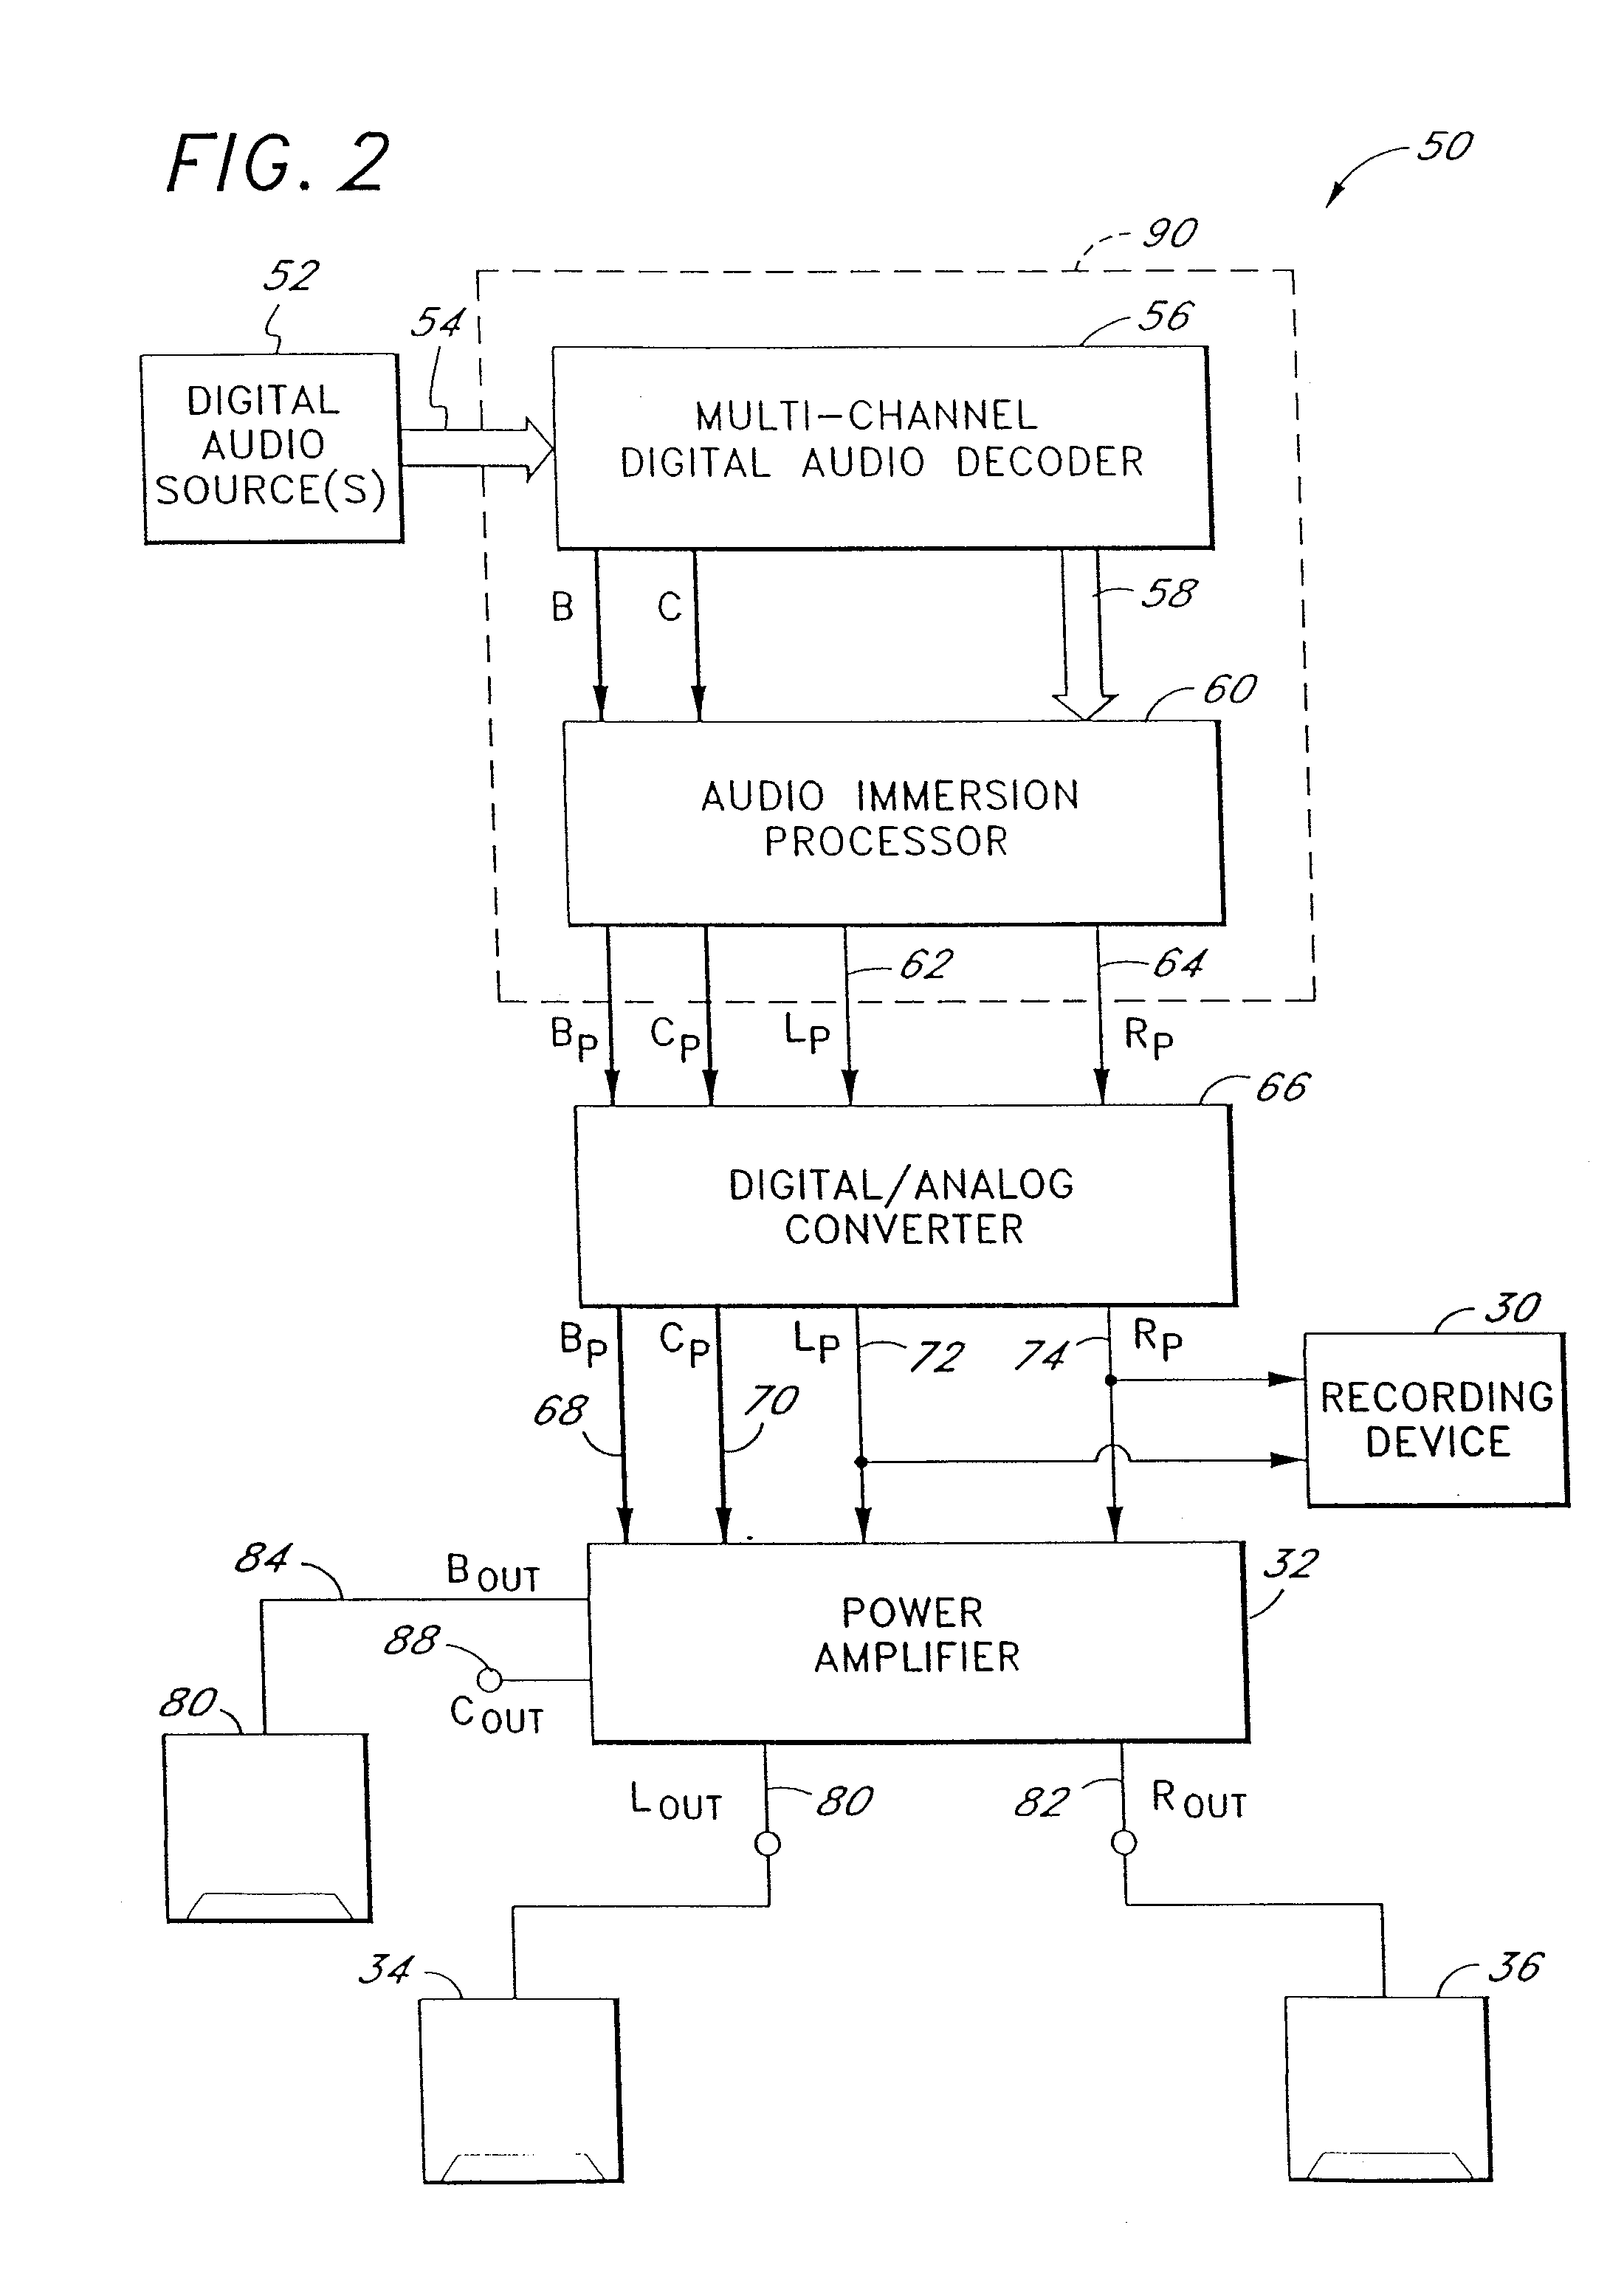 Multi-channel audio enhancement system for use in recording and playback and methods for providing same